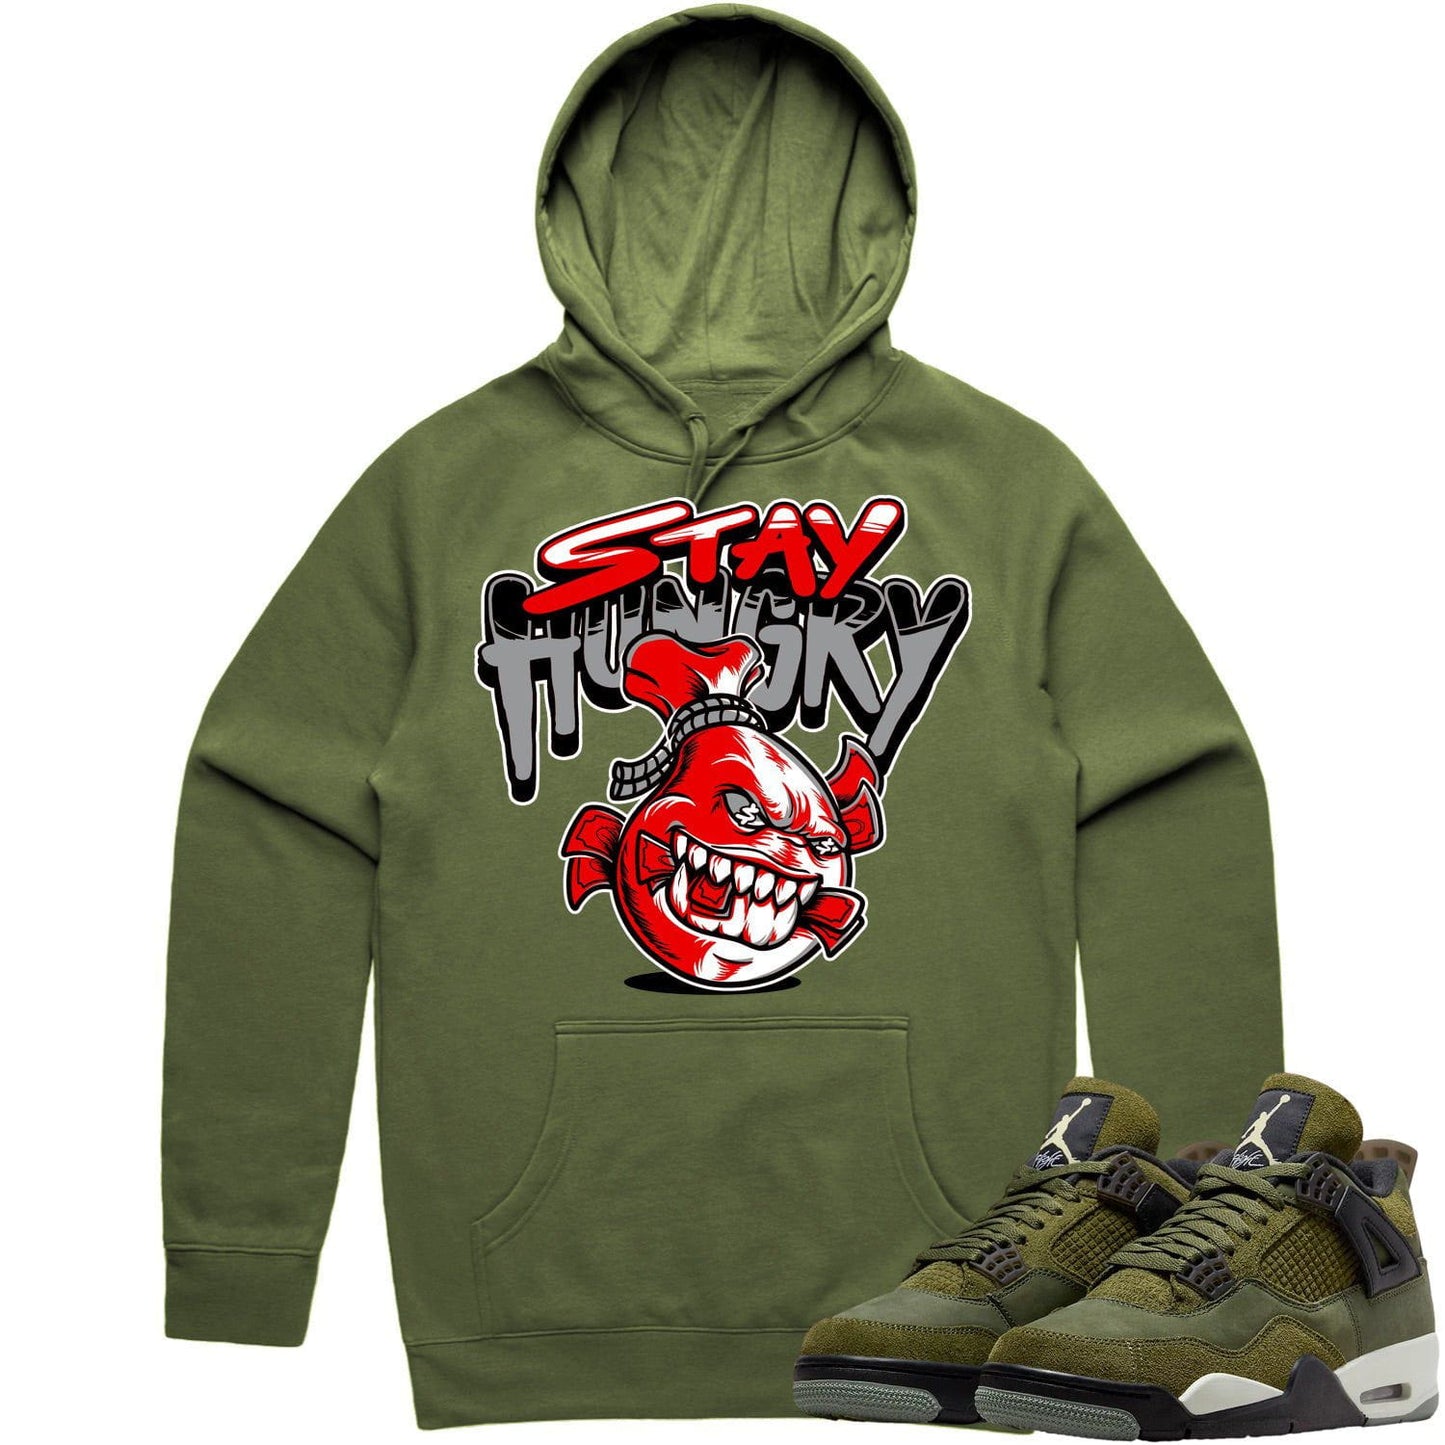 Craft Olive 4s Hoodie - Jordan Retro 4 Olive Shirts - Stay Hungry